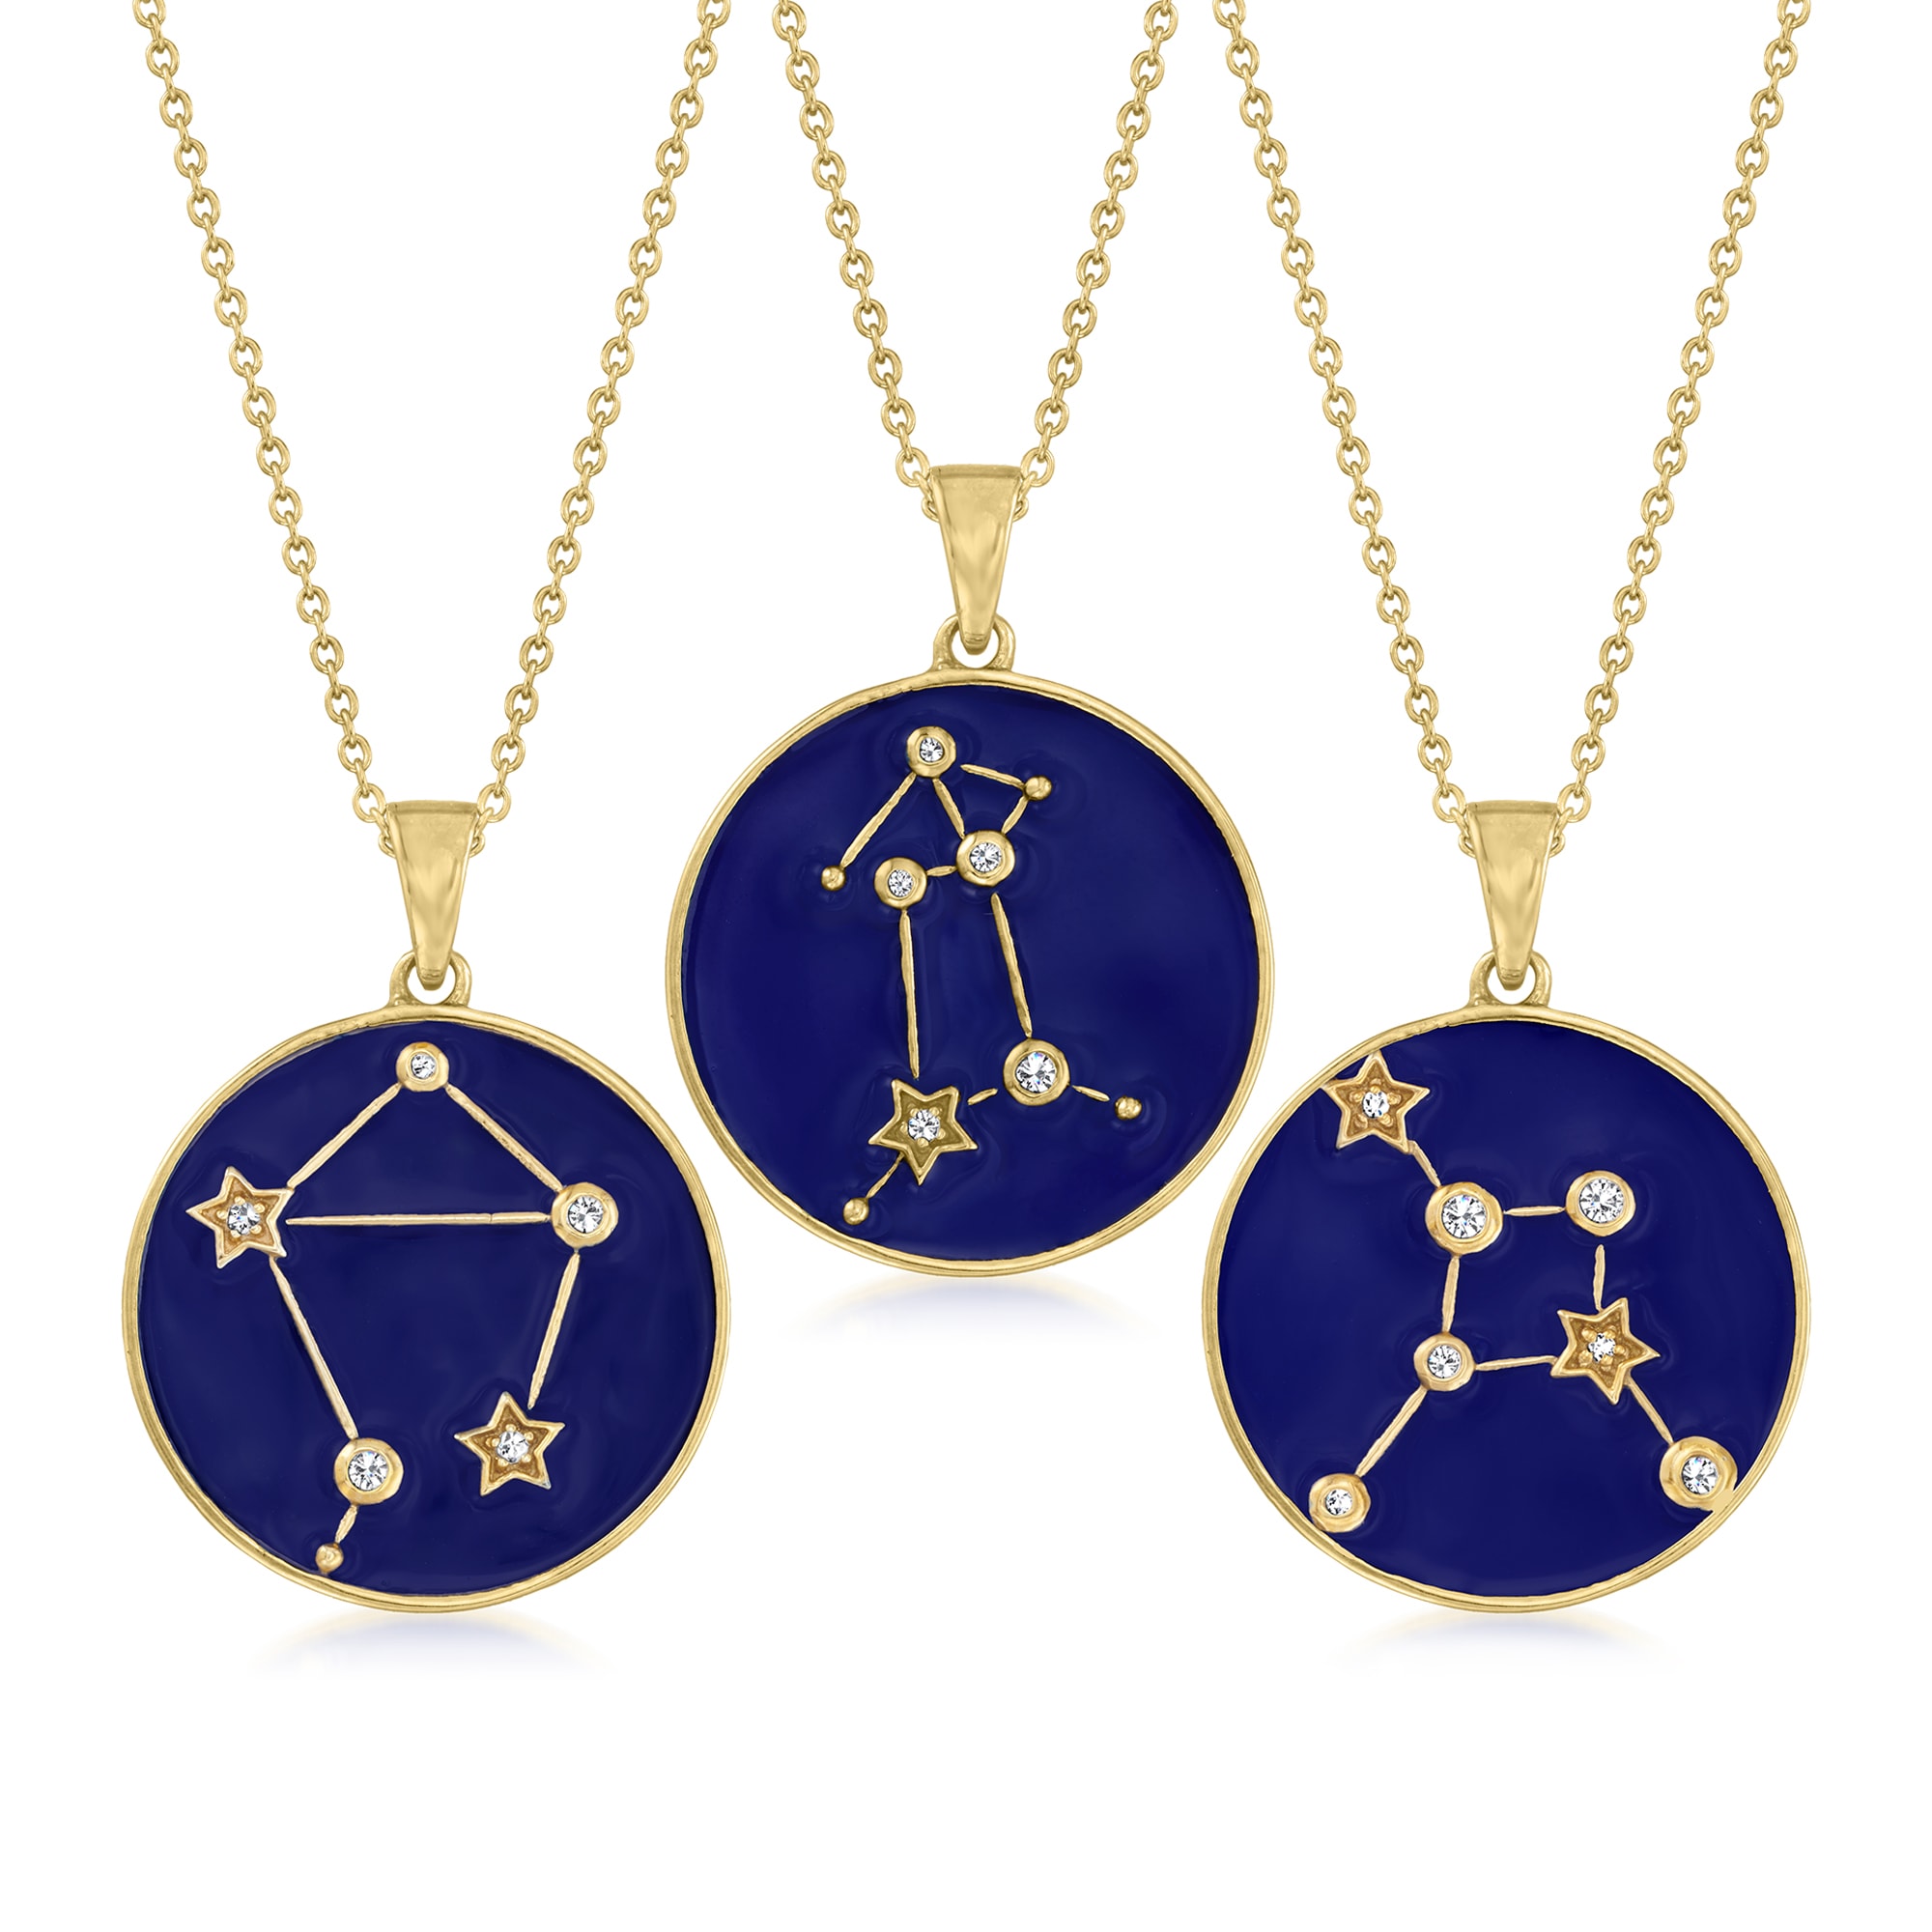 OCESRIO 12 Constellation Zodiac Charms for Jewelry Making Gold Plated  Copper Zircon for Jewelry Findings Supplies pdta618